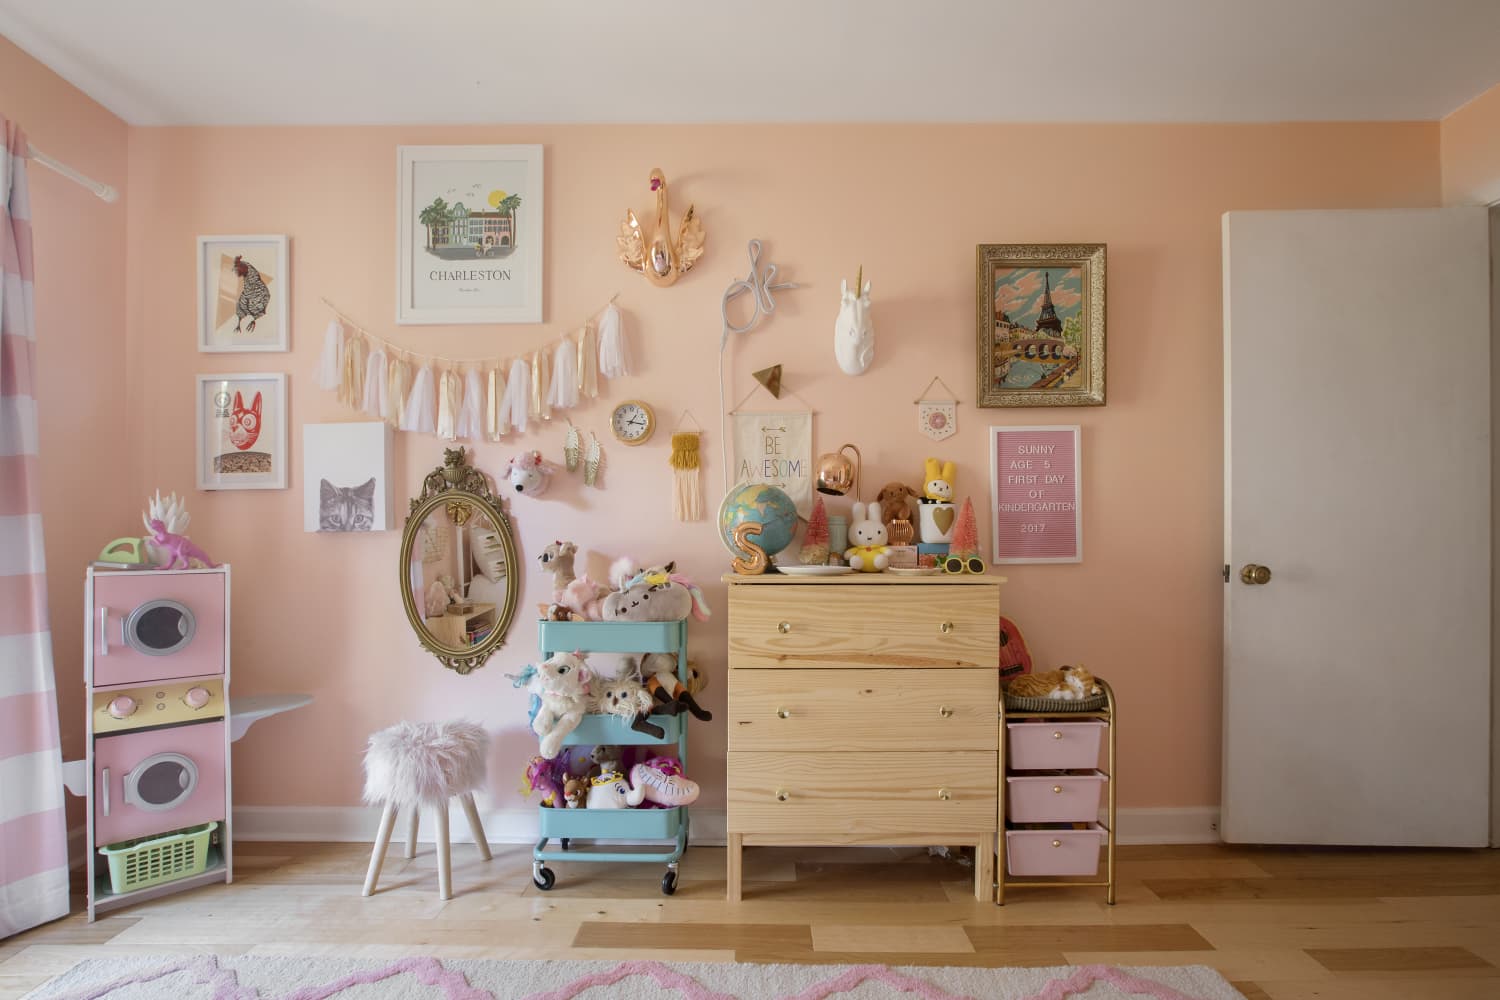 12 Toy Organizers to Help Declutter a Messy Kid's Room